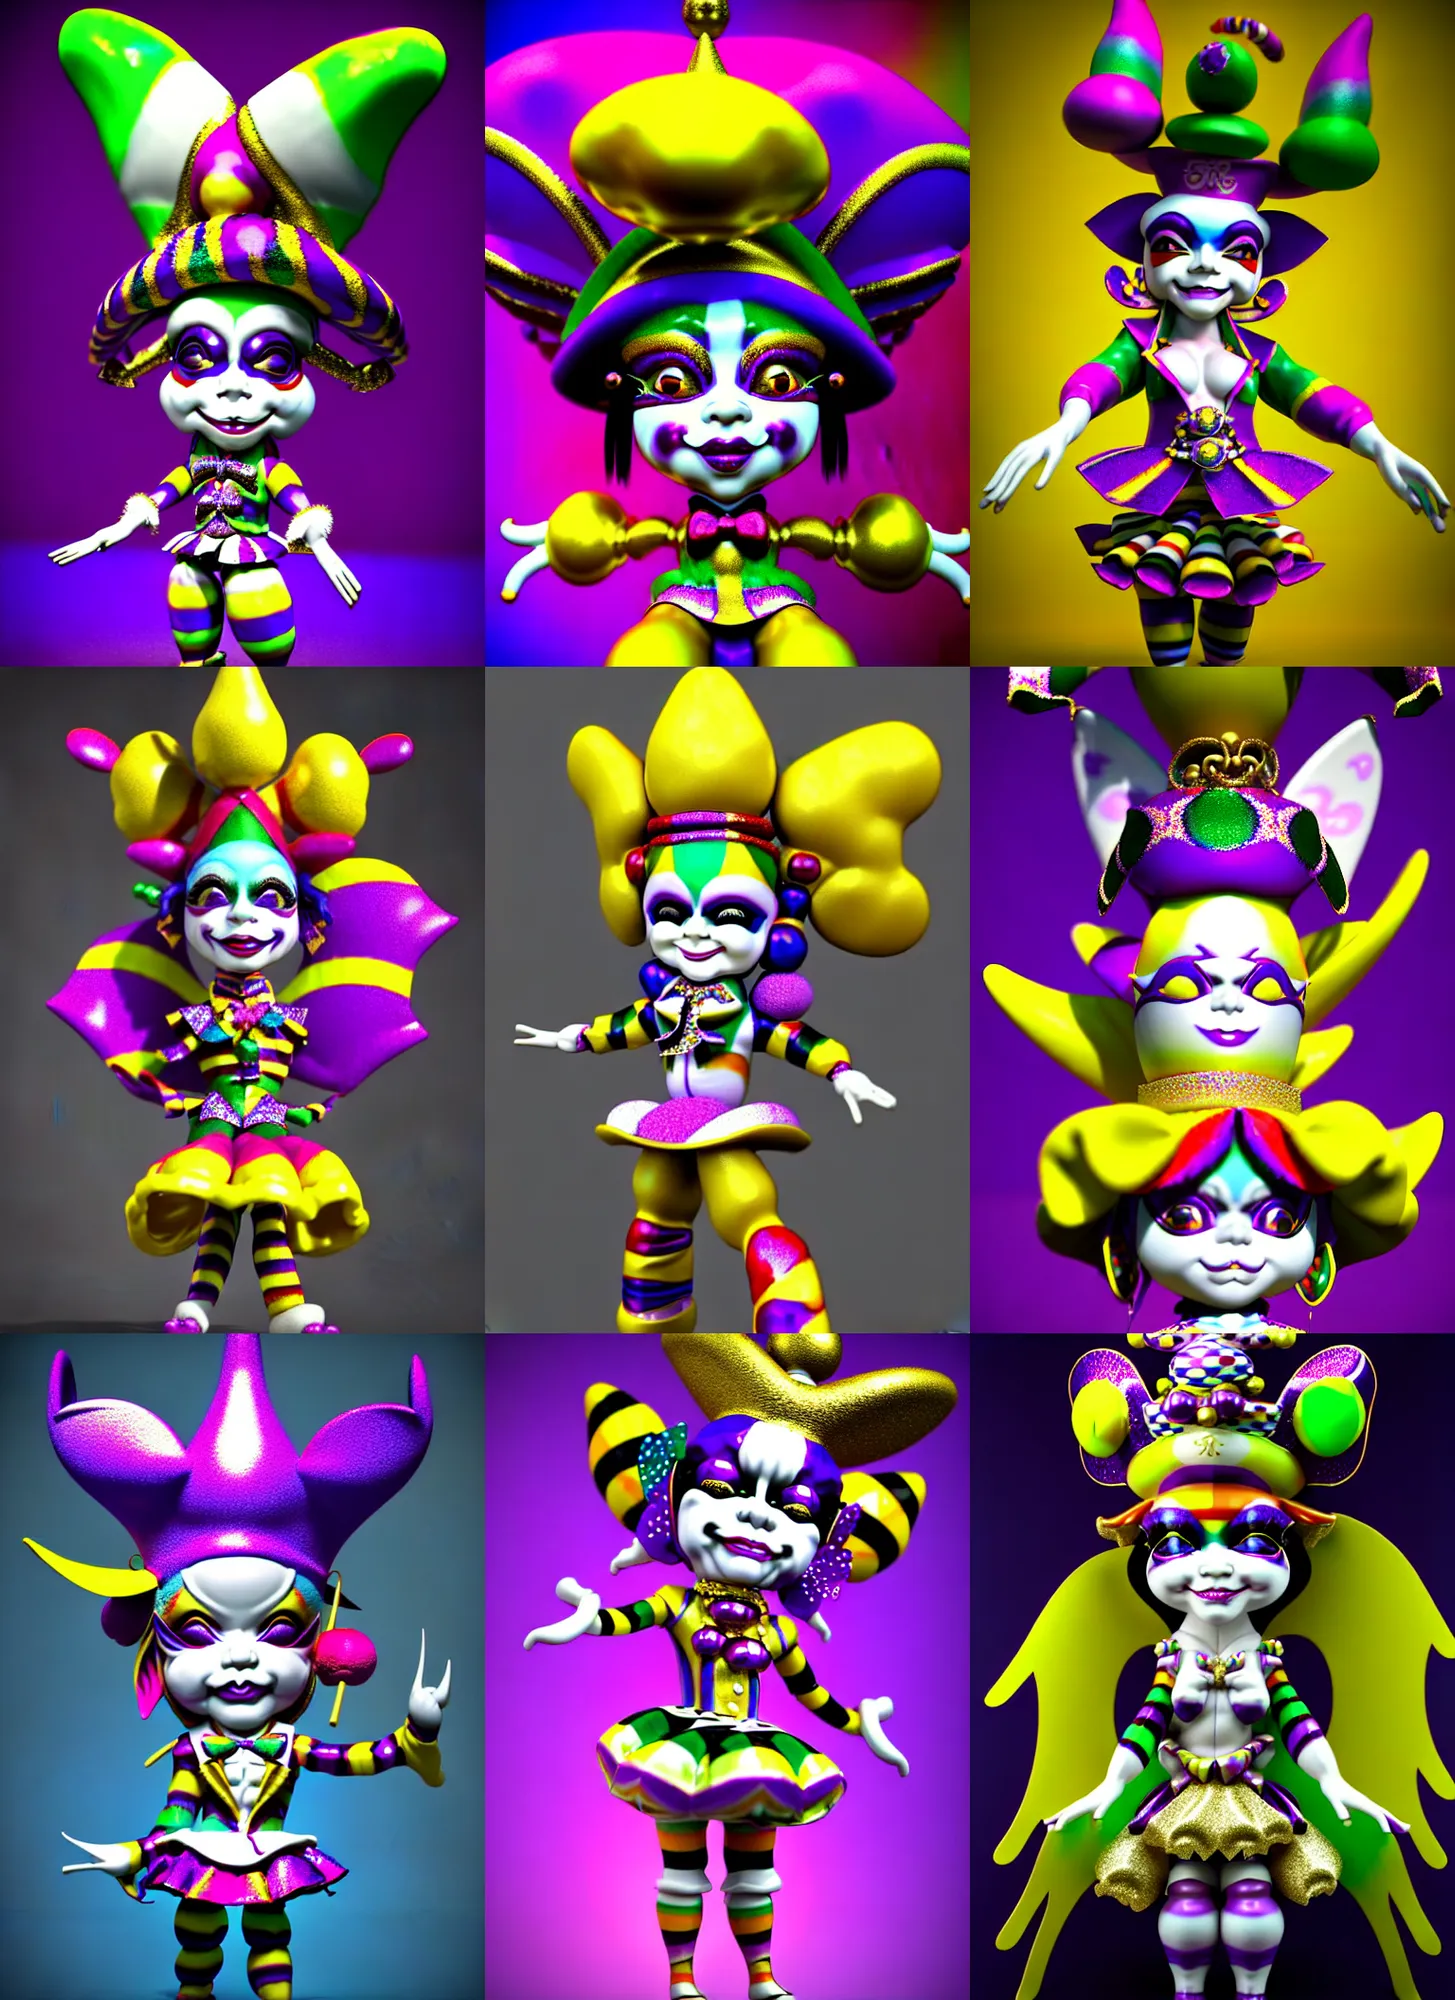 Prompt: 3d render of chibi 'porcelain Mardi Gras jester harlequin doll' by Ichiro Tanida wearing a 'jester cap and bells cockscomb cap' and wearing angel wings against a psychedelic swirly background with 3d butterflies and 3d flowers n the style of 1990's CG graphics 3d rendered y2K aesthetic by Ichiro Tanida, 3DO magazine